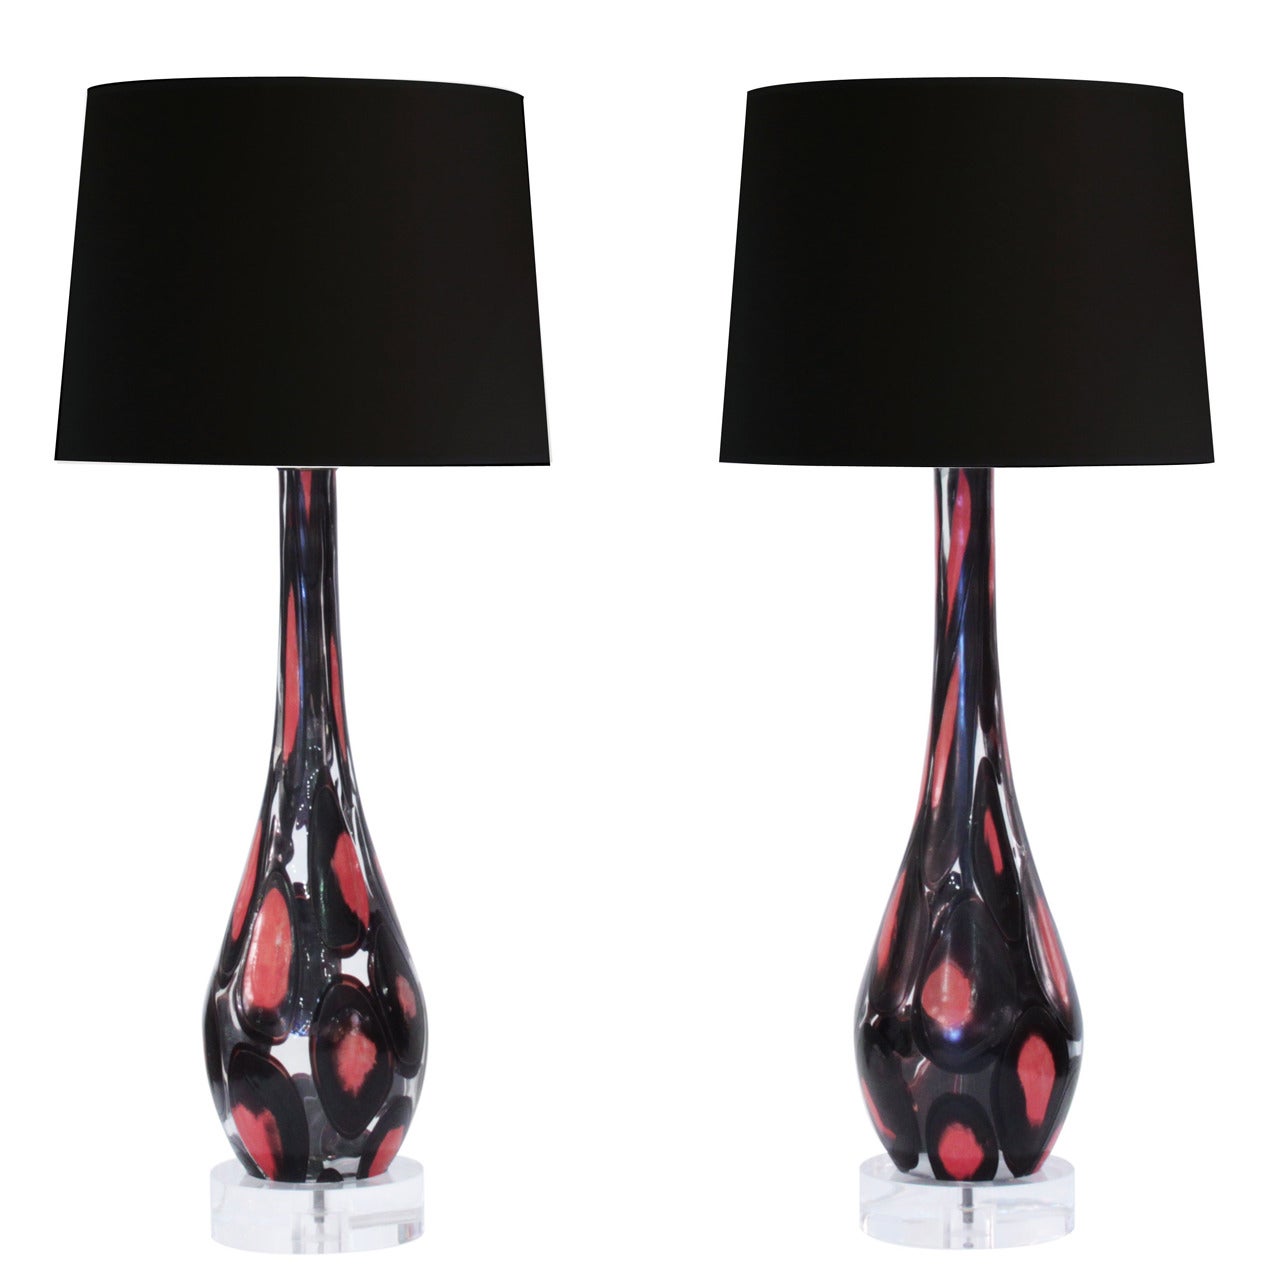 Pair of Handblown Glass Table Lamps by Fratelli Toso